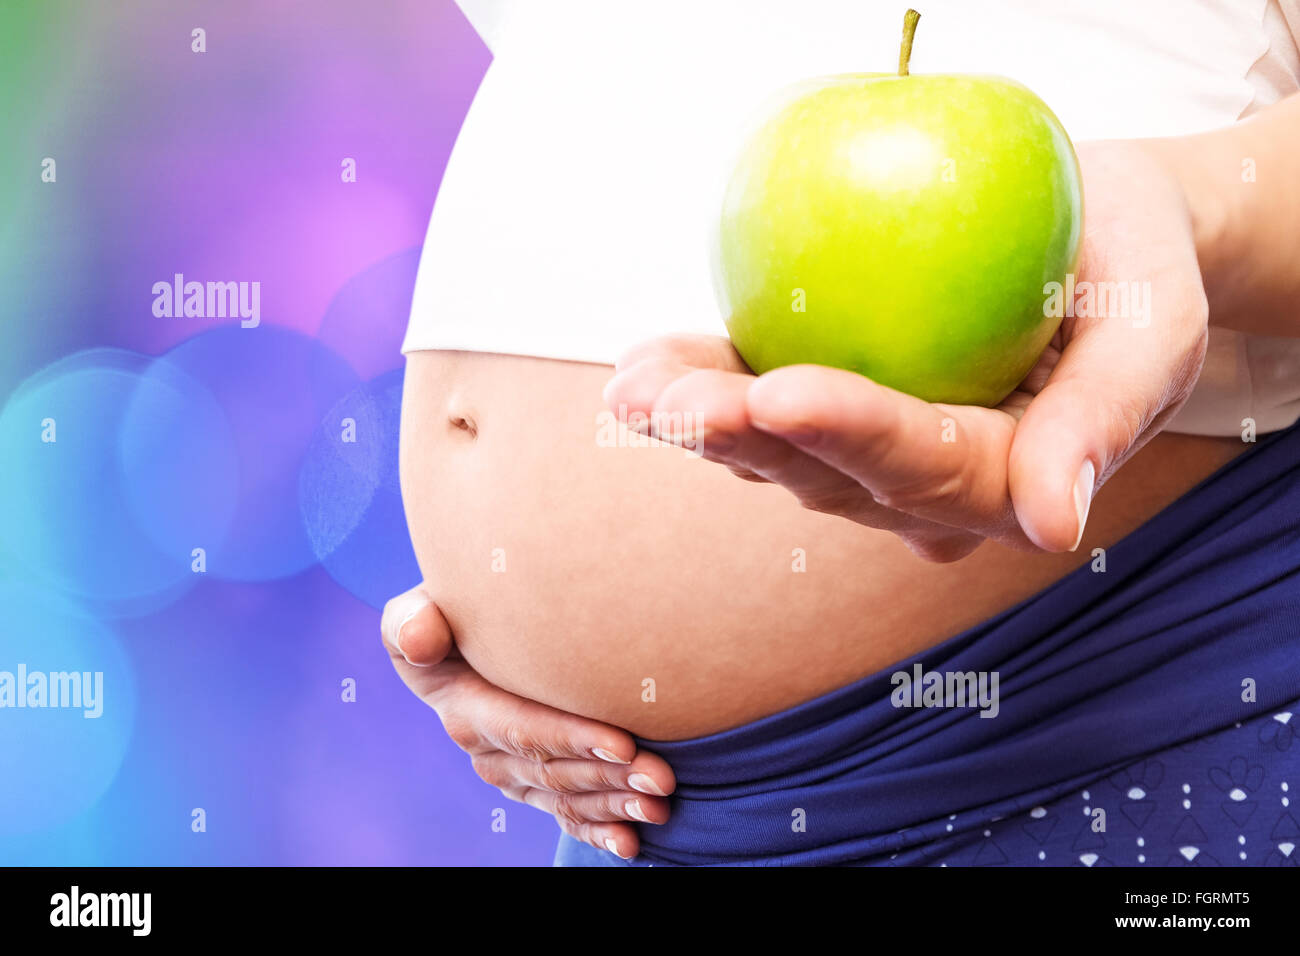 Composite image of pregnant woman holding green apple Stock Photo